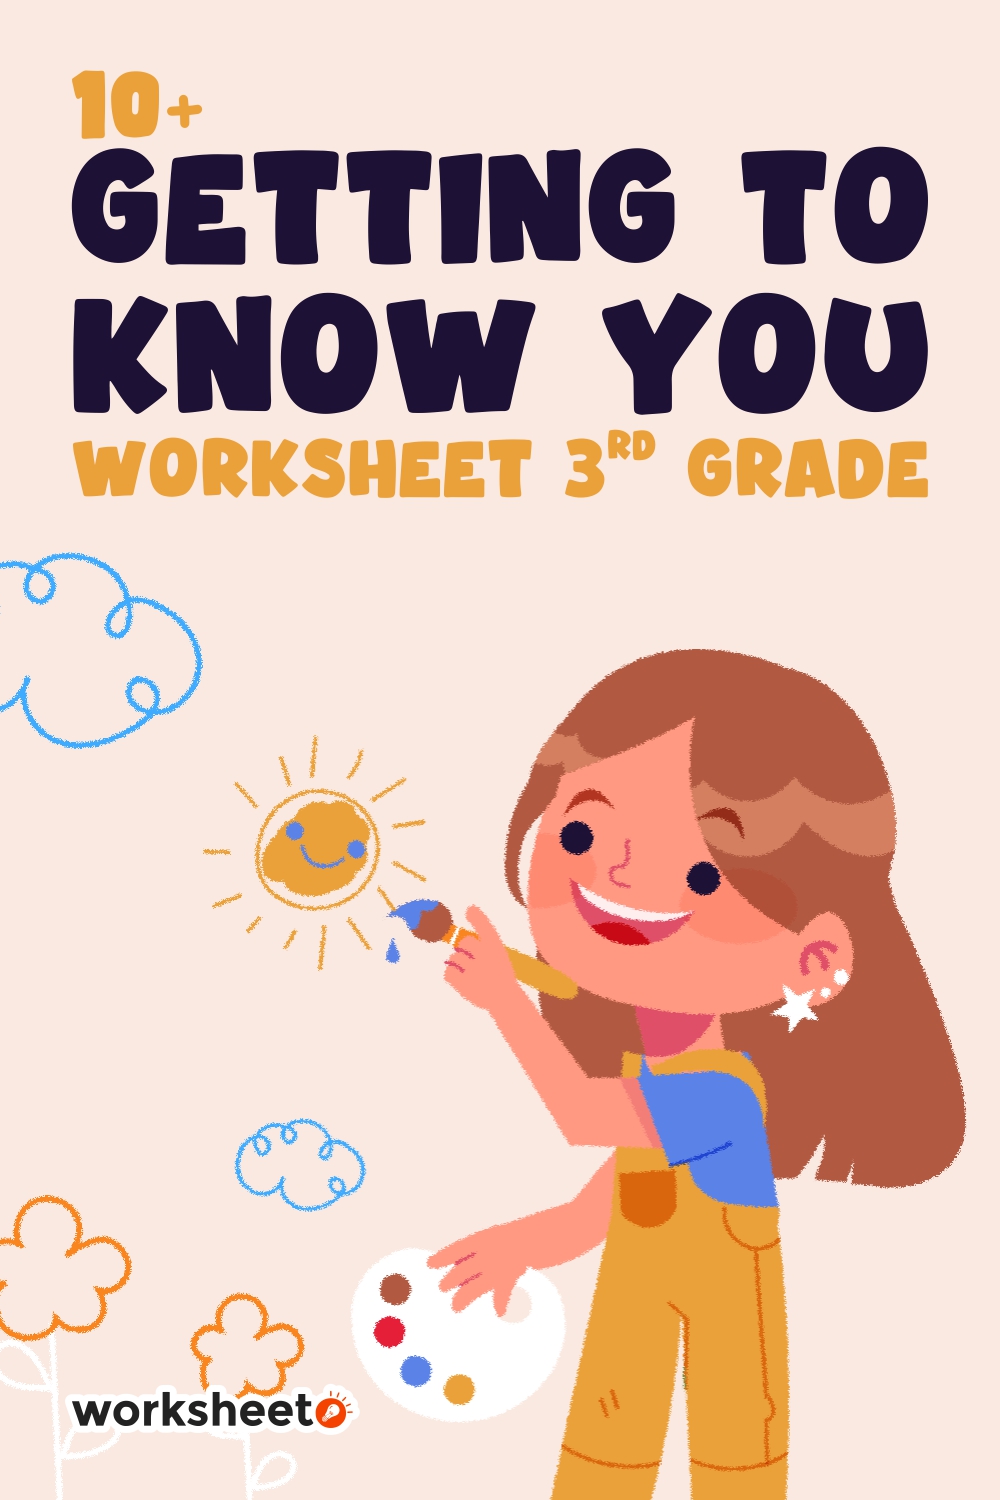 13 Images of Getting To Know You Worksheets 3rd Grade